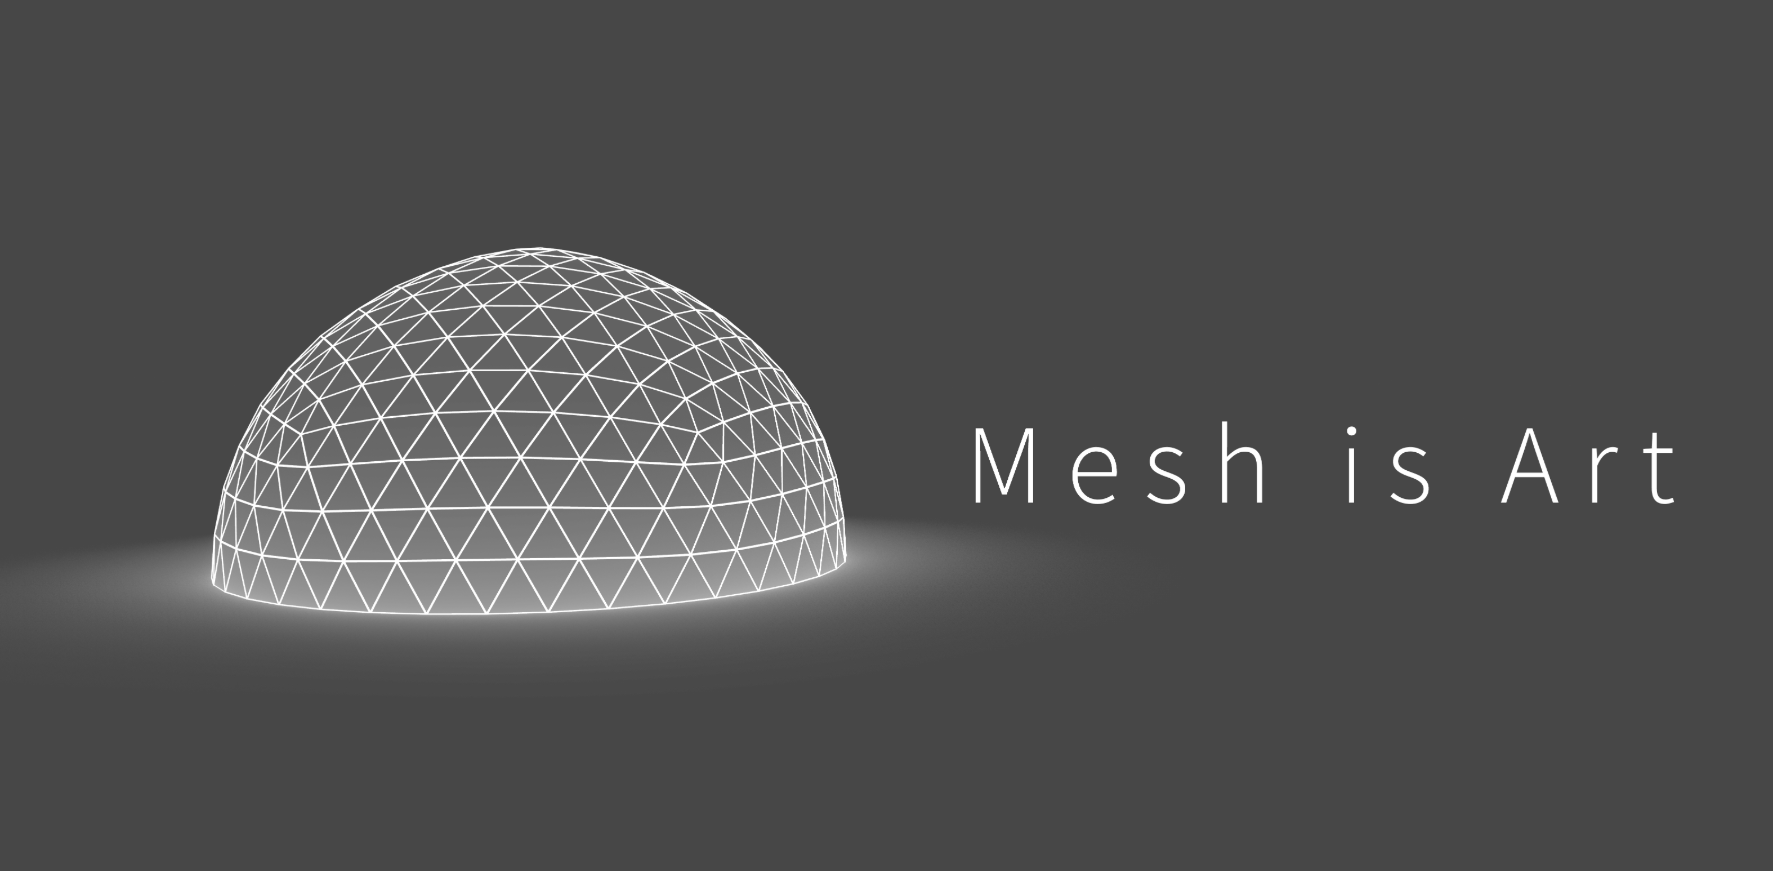 Mesh is Art (2): Triangles